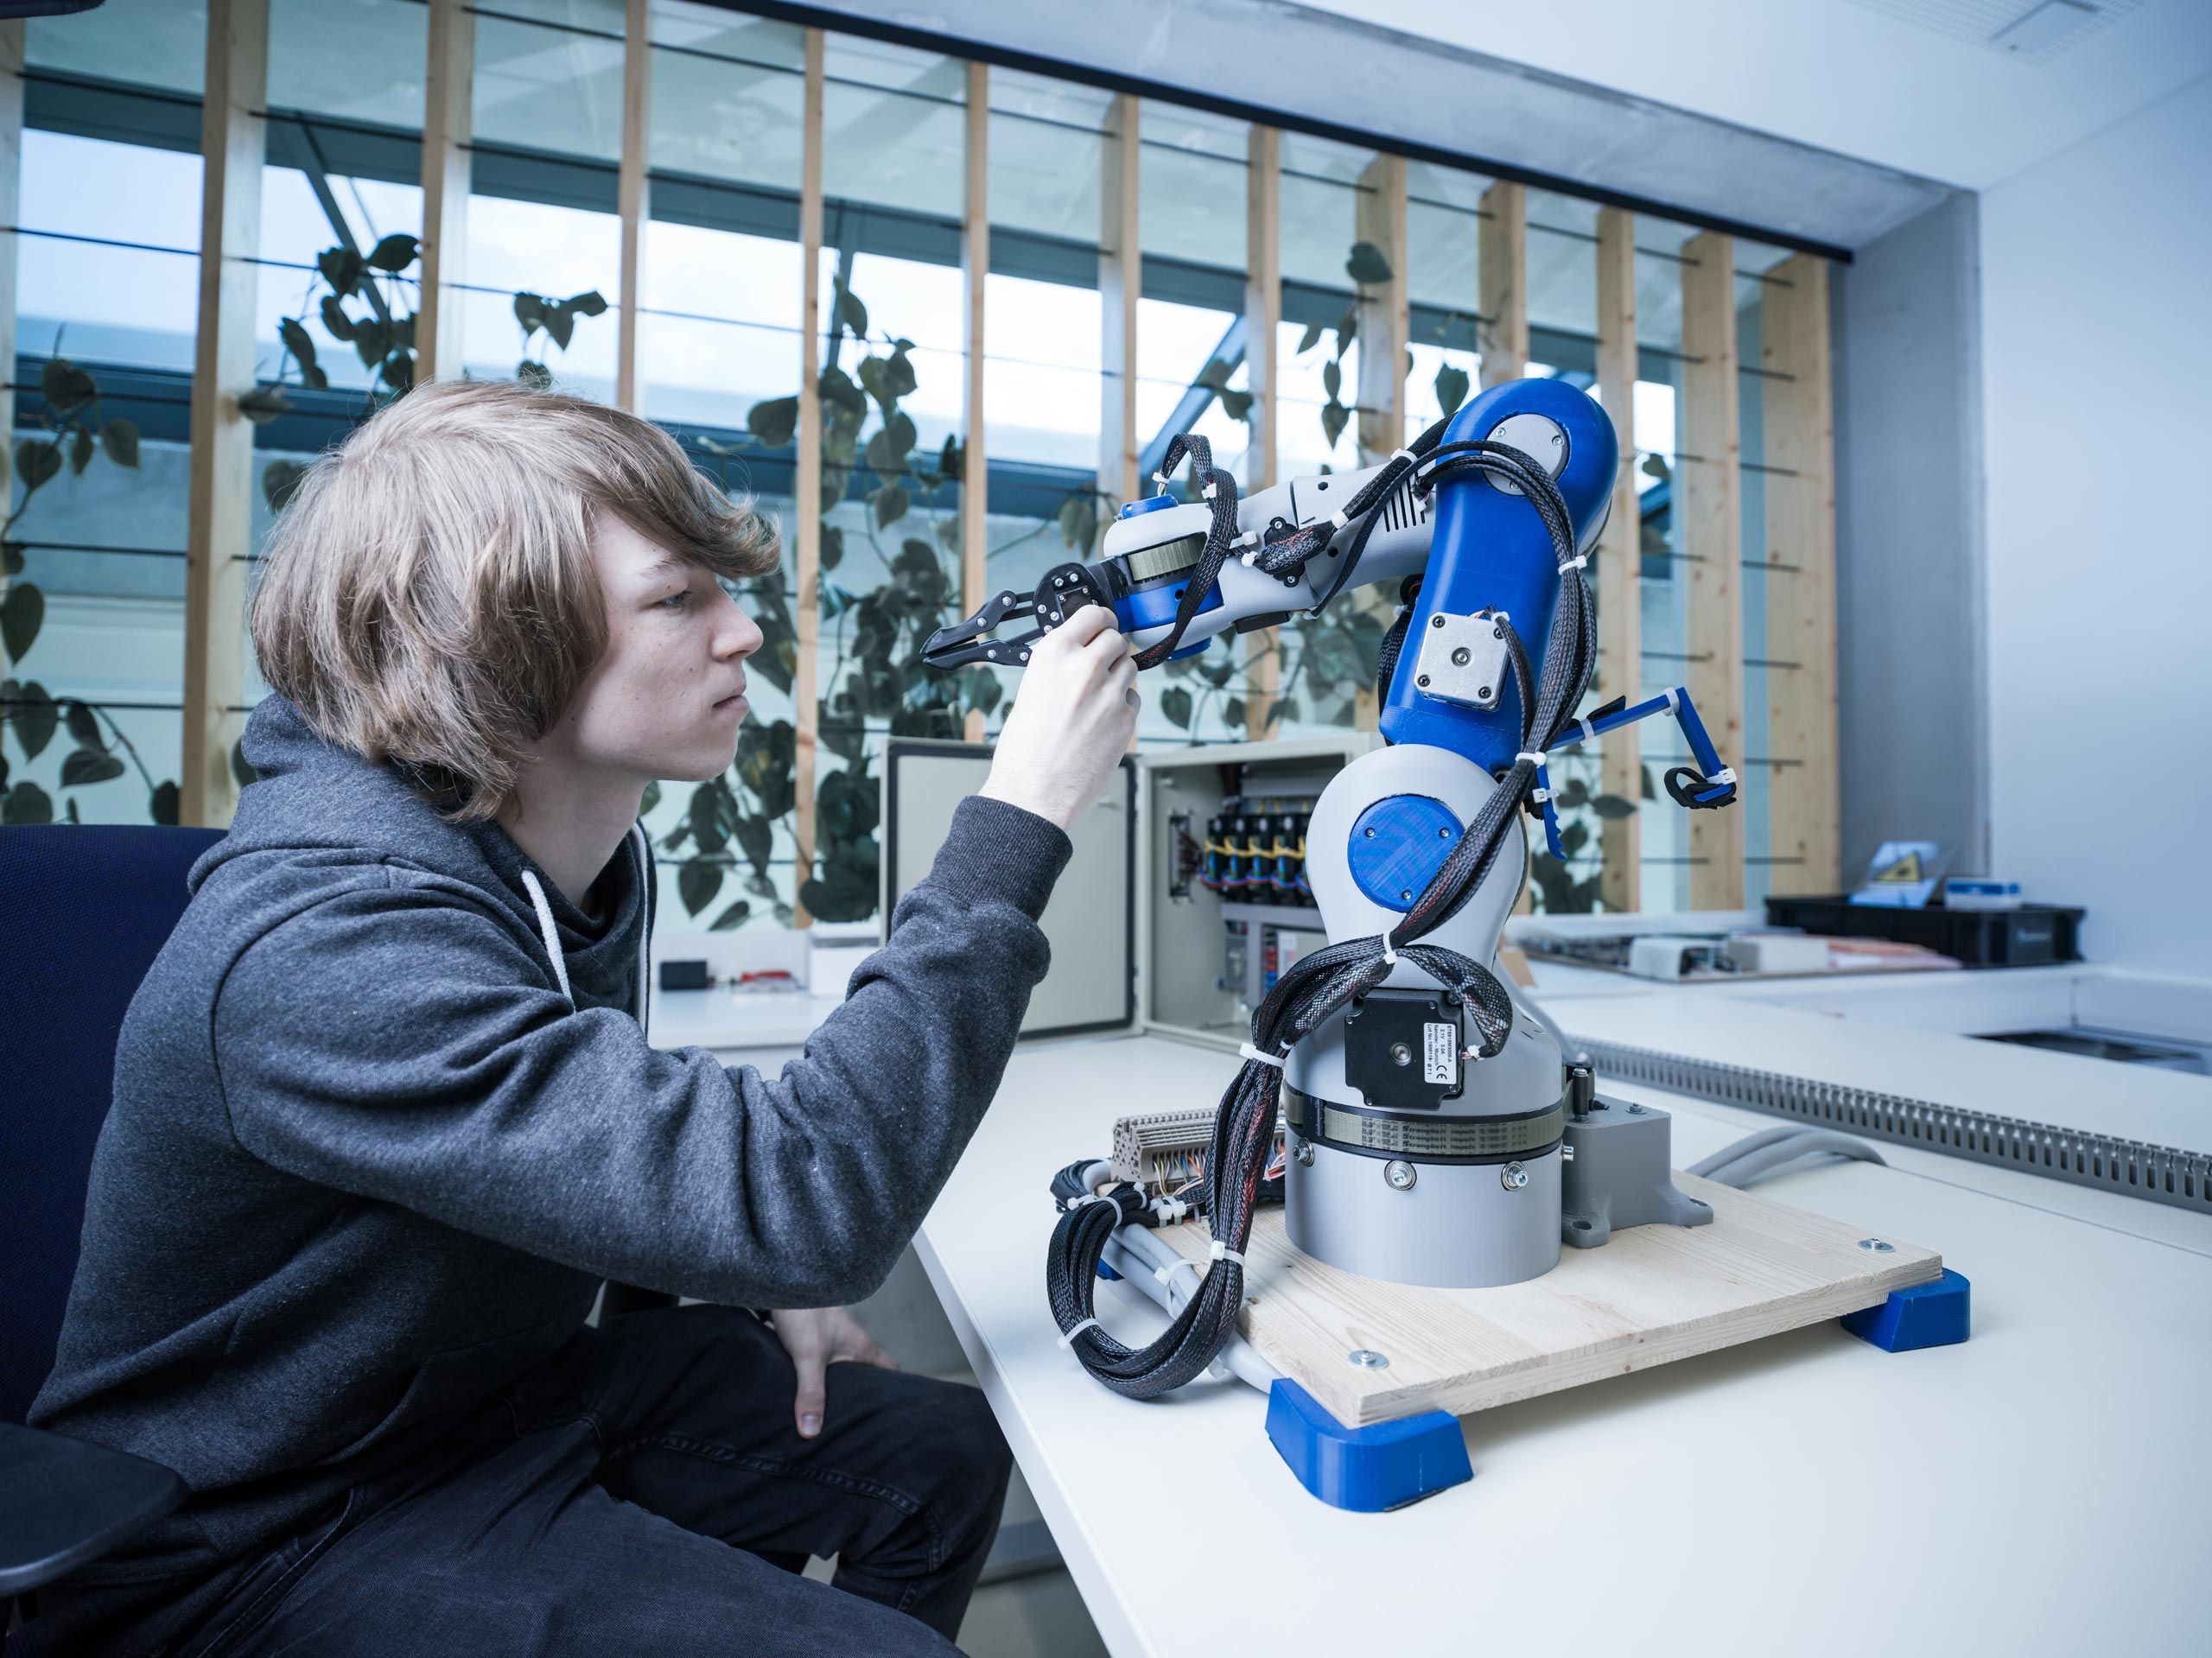  A young man works on the robot